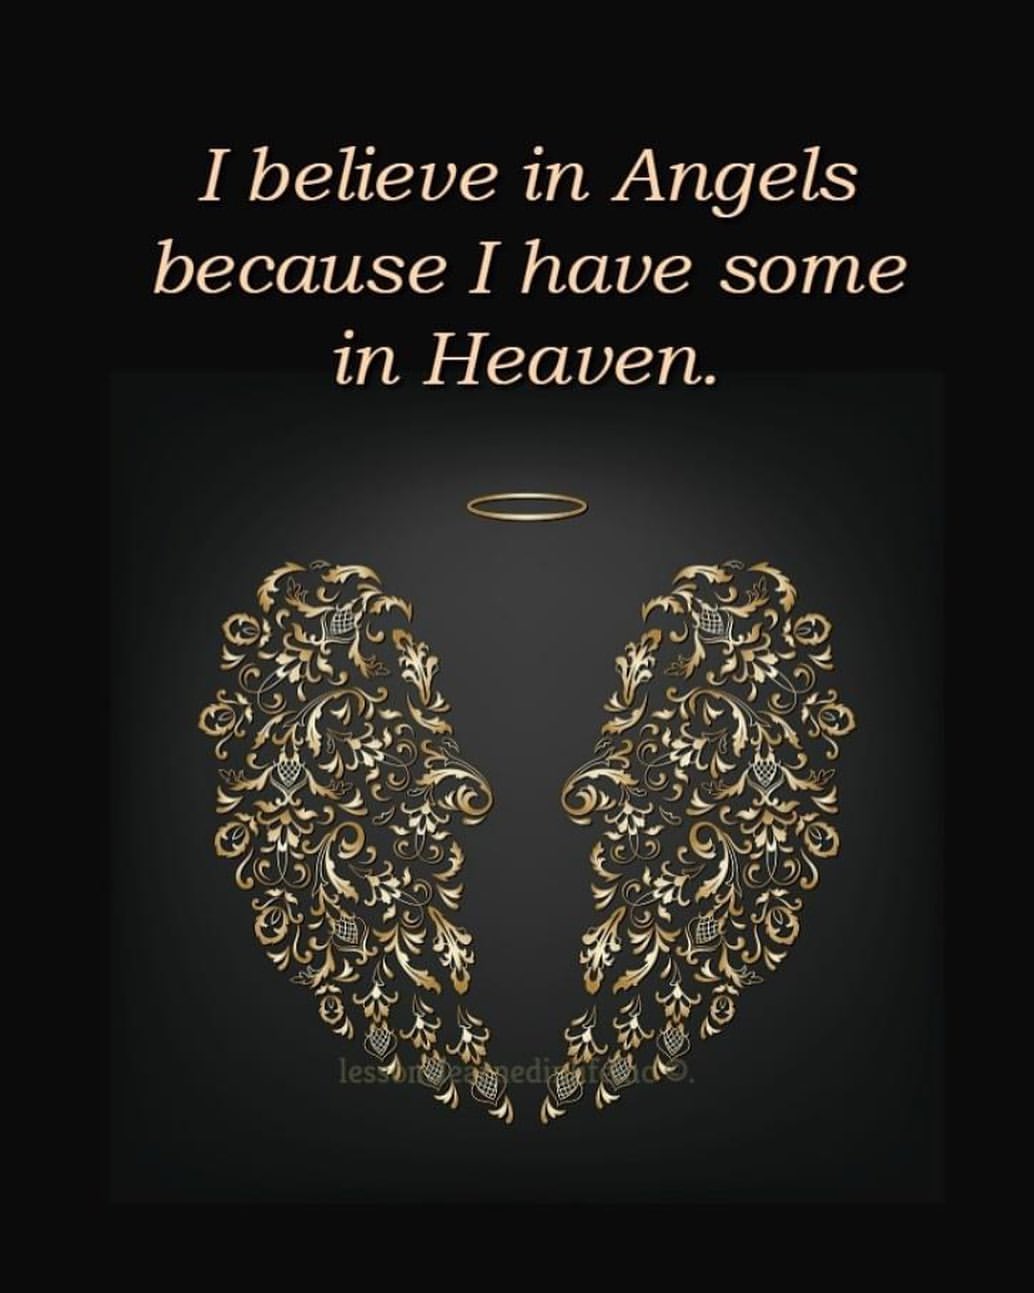 I believe in Angels because I have some in Heaven.